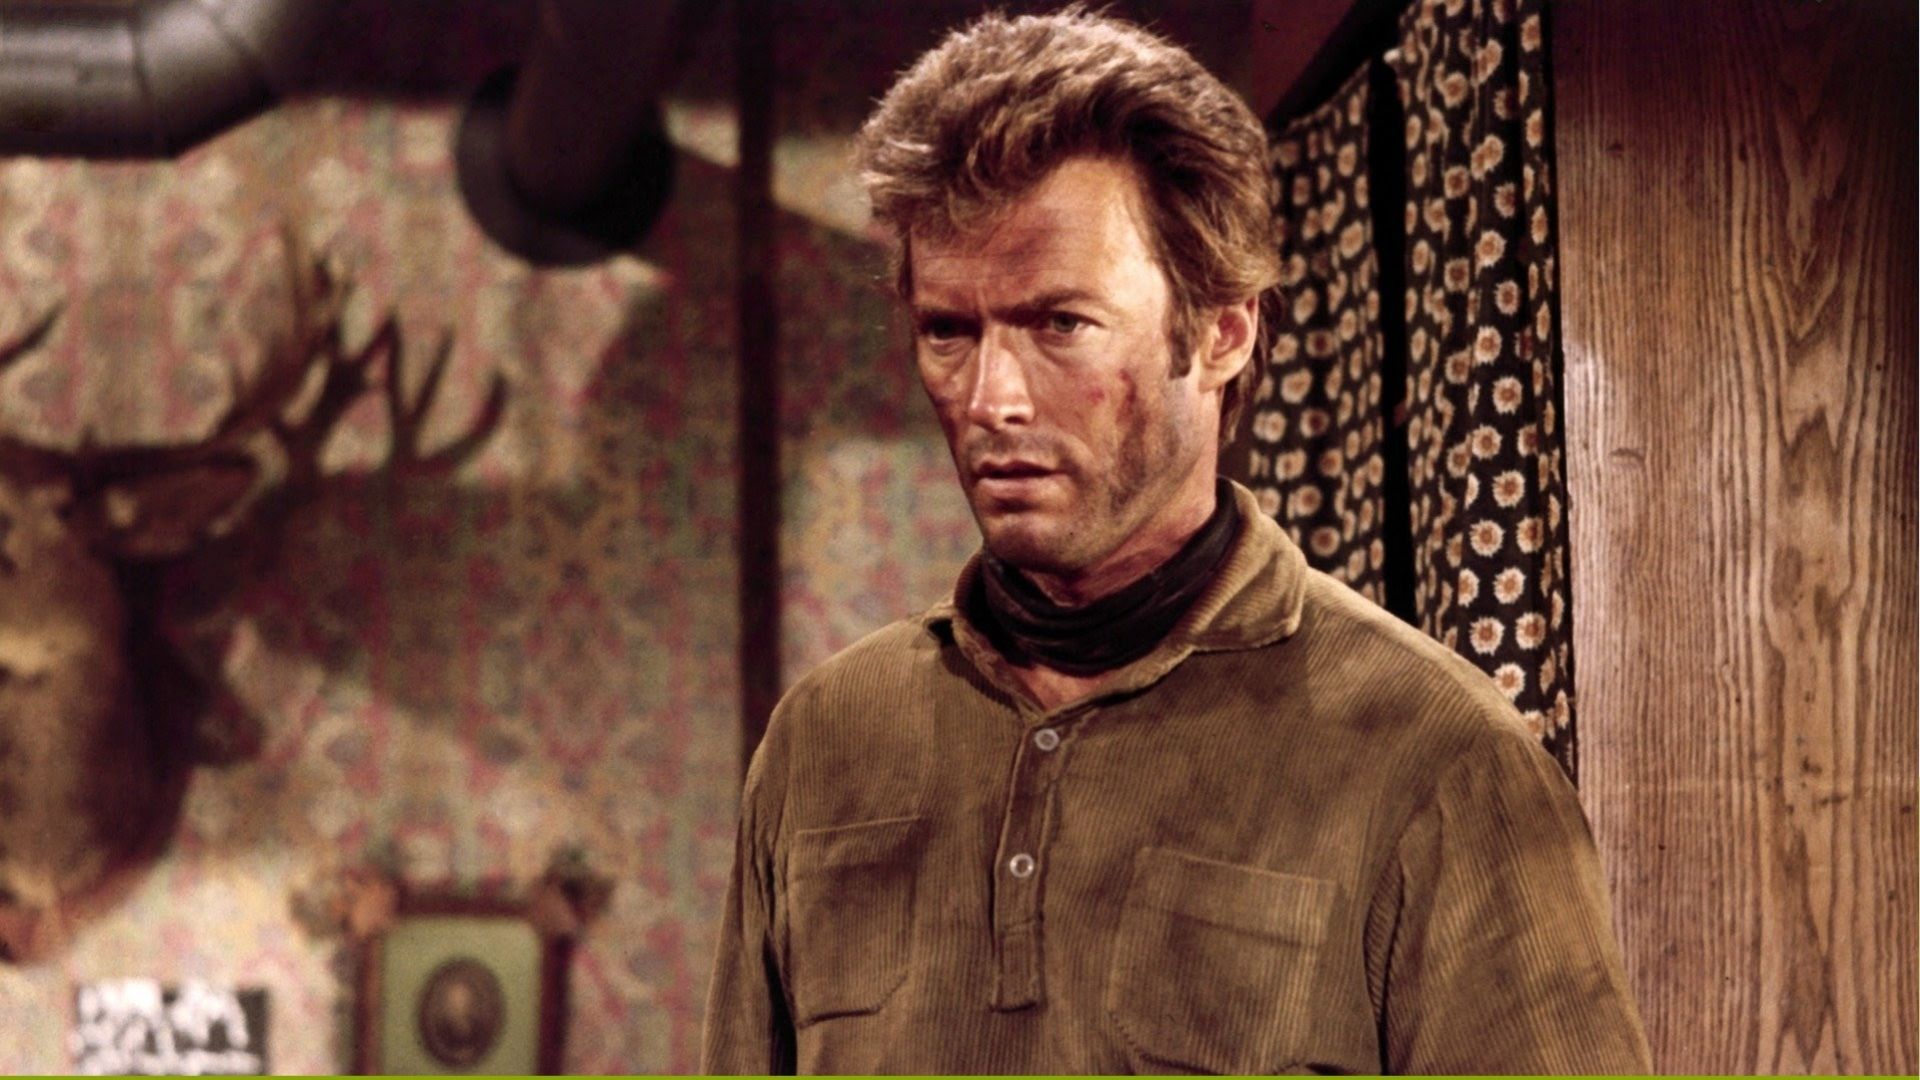 Hang 'Em High with Clint Eastwood